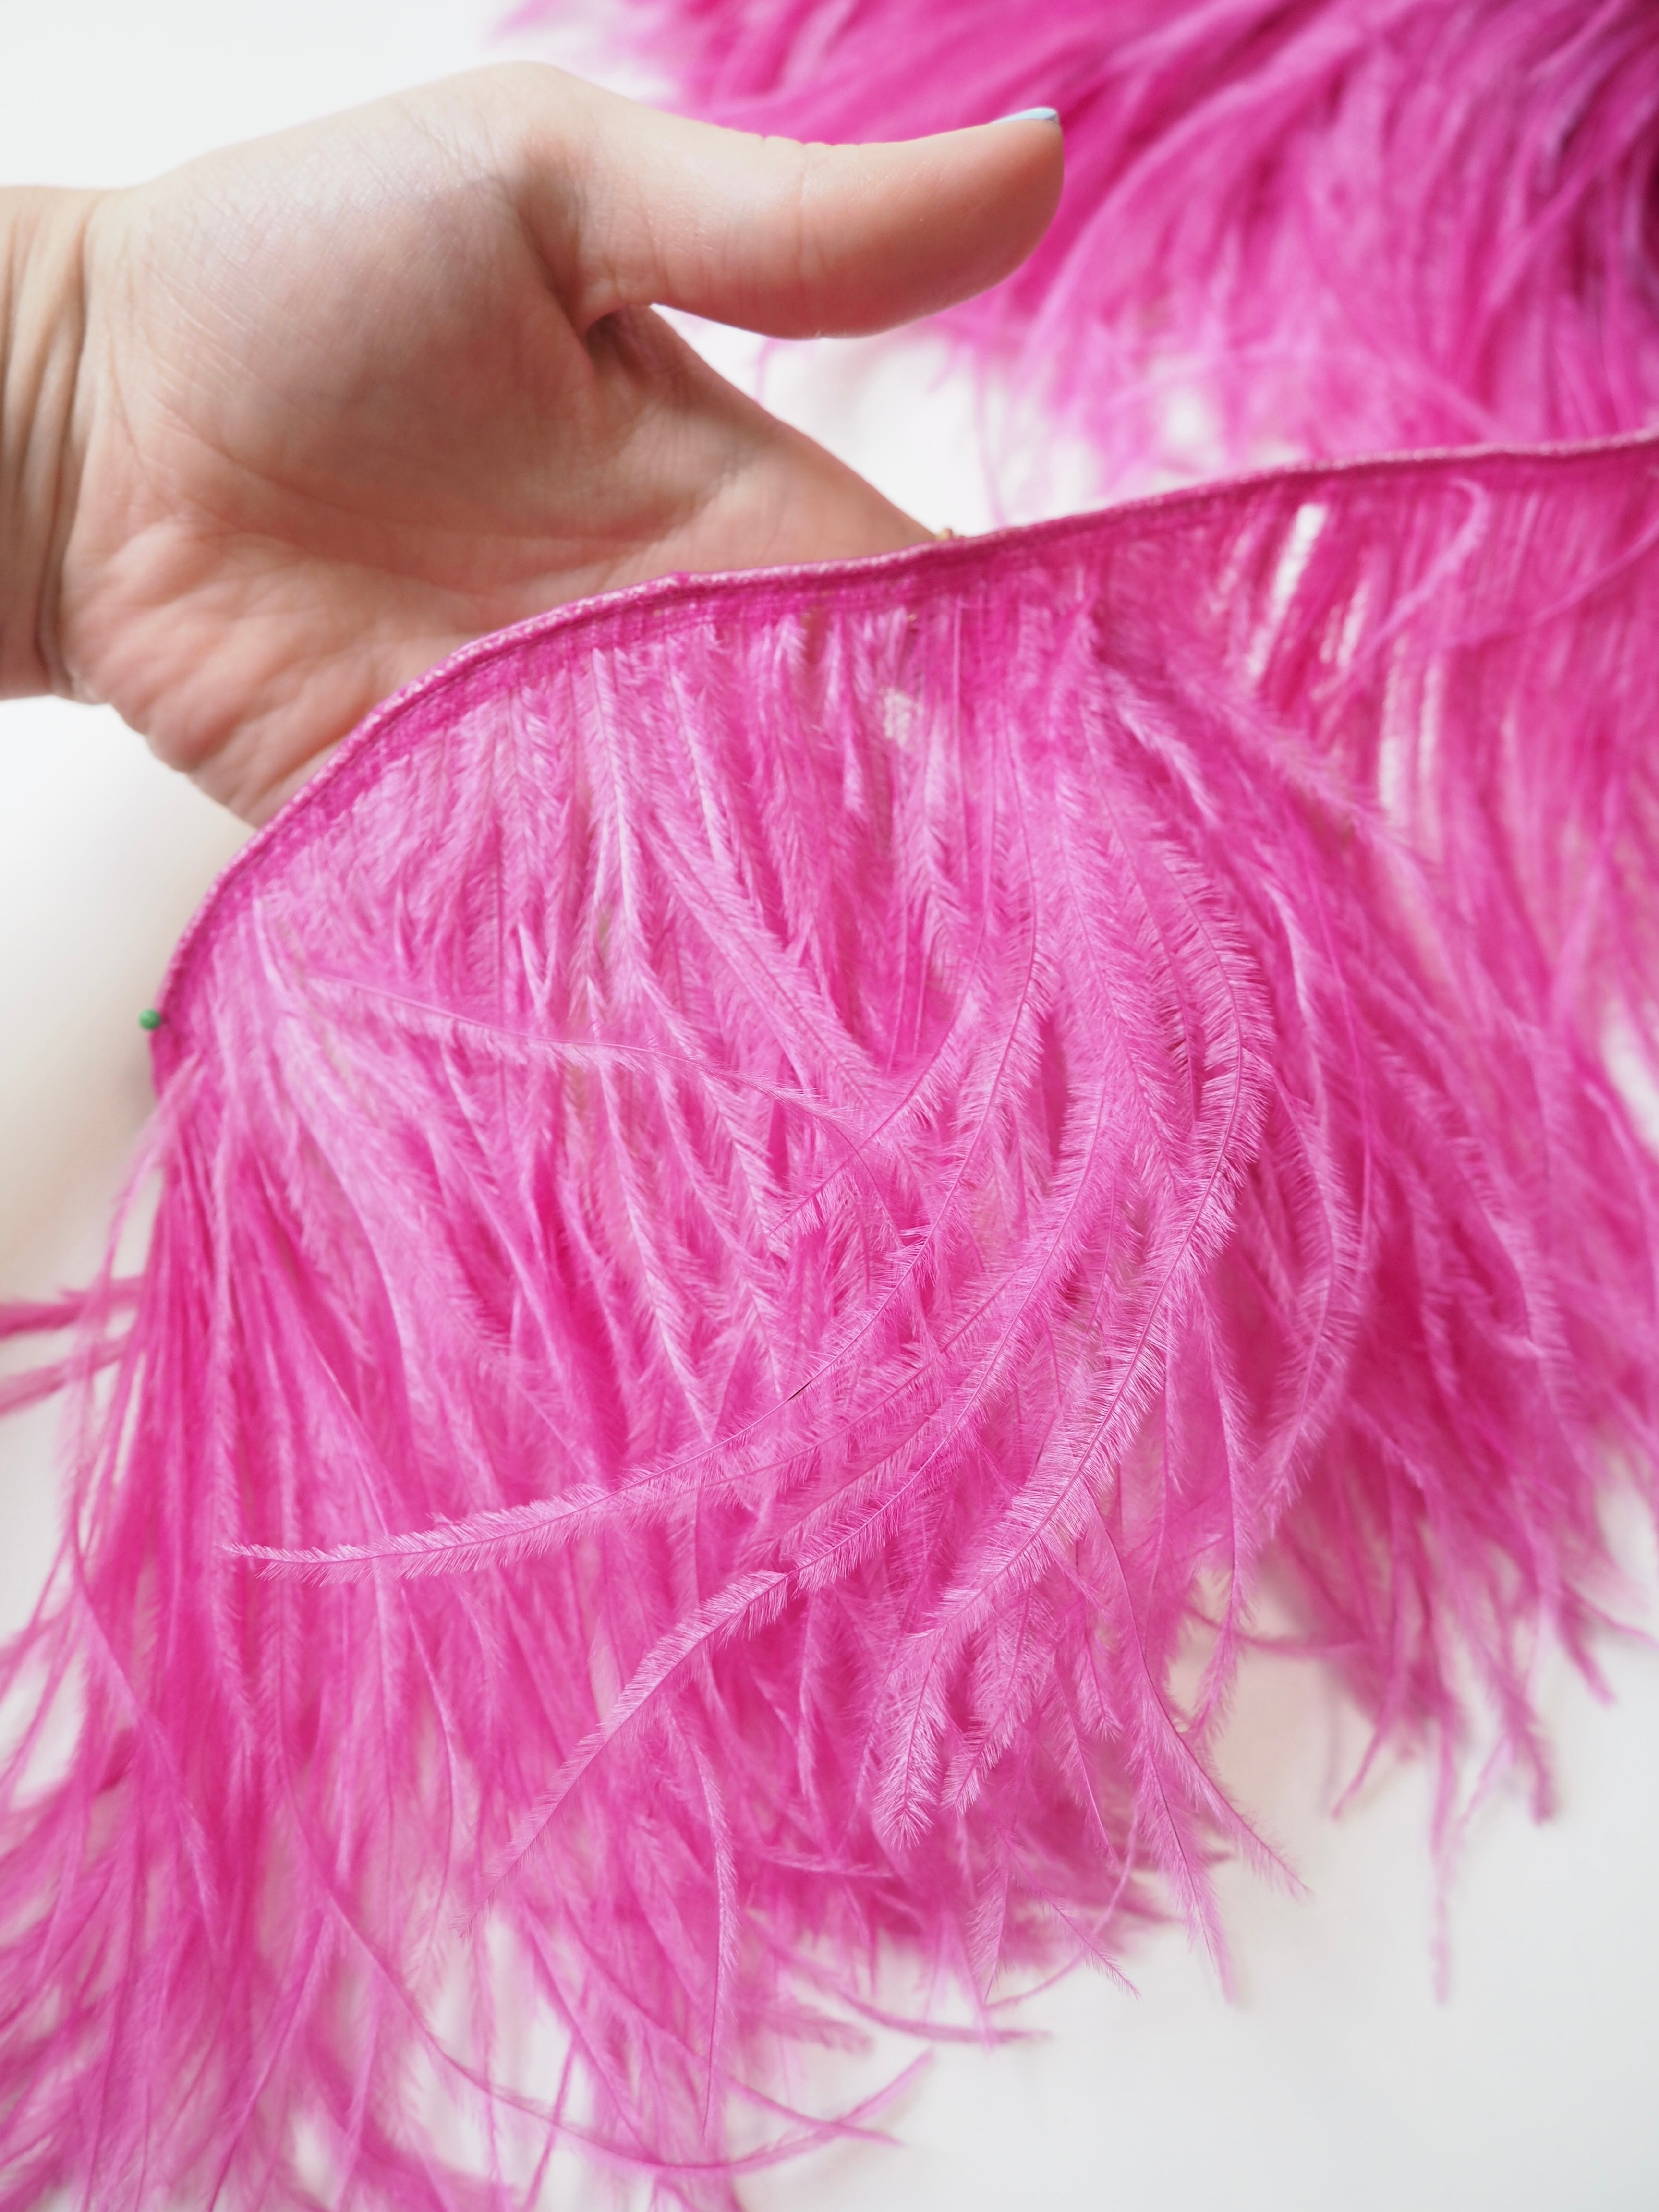 Pink Ostrich Feathers